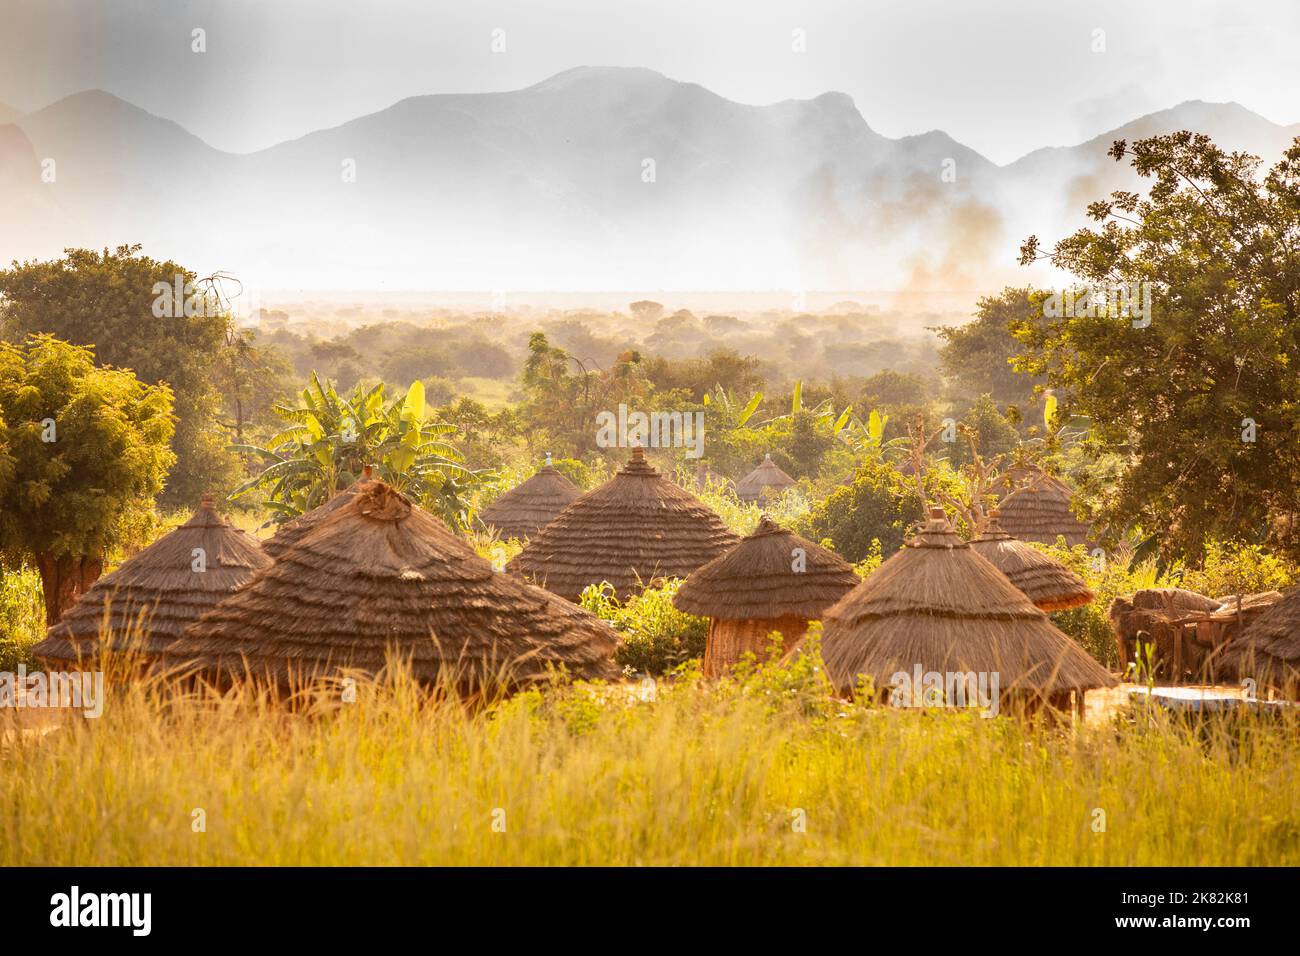 Uganda's Abim district is marked by mud and grass thatch villages and dramatic mountain scenery. Uganda, East Africa. Stock Photo